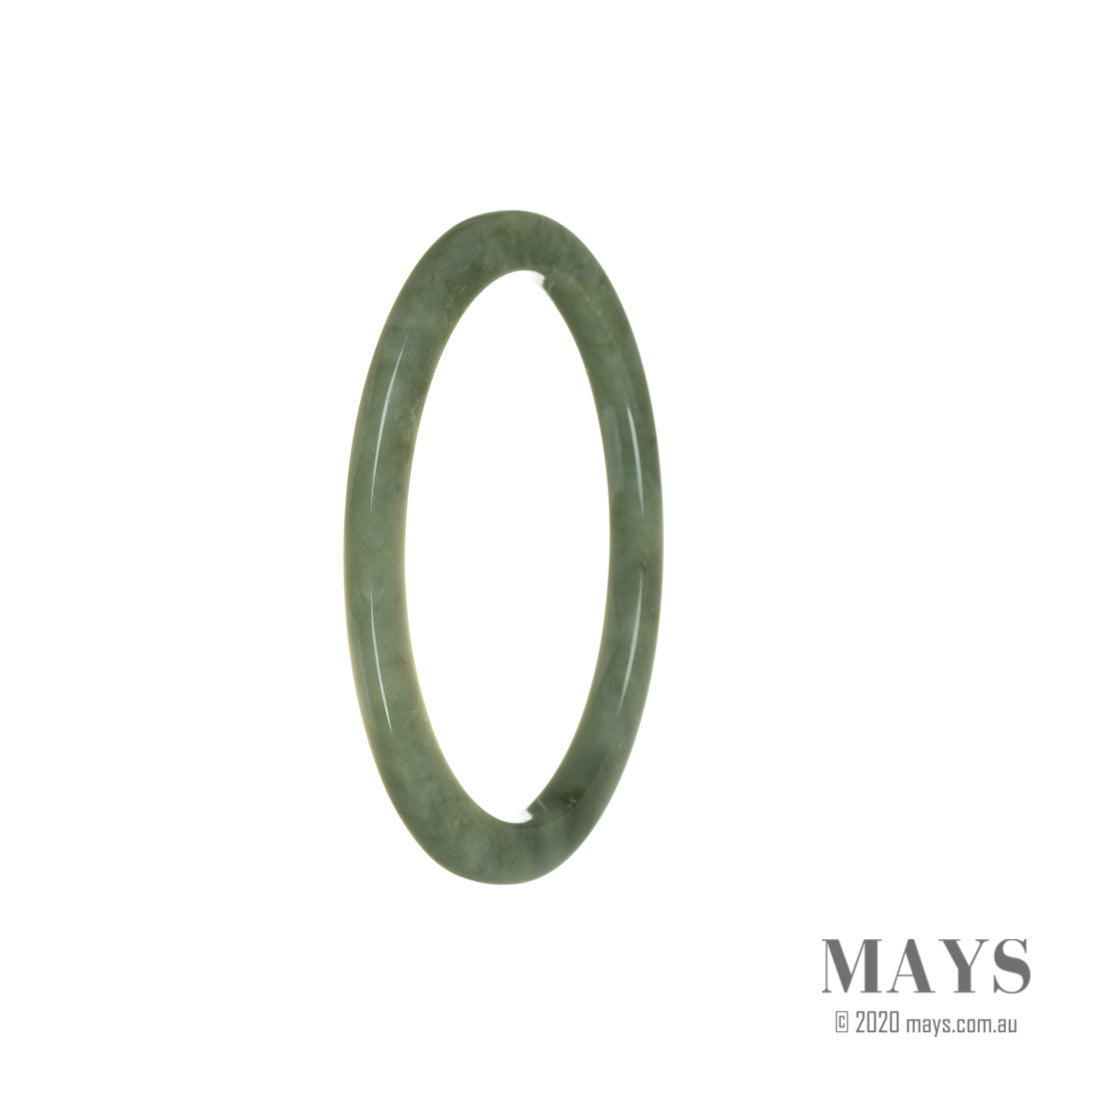 A close-up photo of a delicate, thin bangle bracelet made of genuine natural green Burma jade. The bracelet has a smooth, polished surface and measures 56mm in diameter. The jade has a beautiful green color, with varying shades and patterns. The bracelet is simple yet elegant, making it a perfect accessory for any occasion.